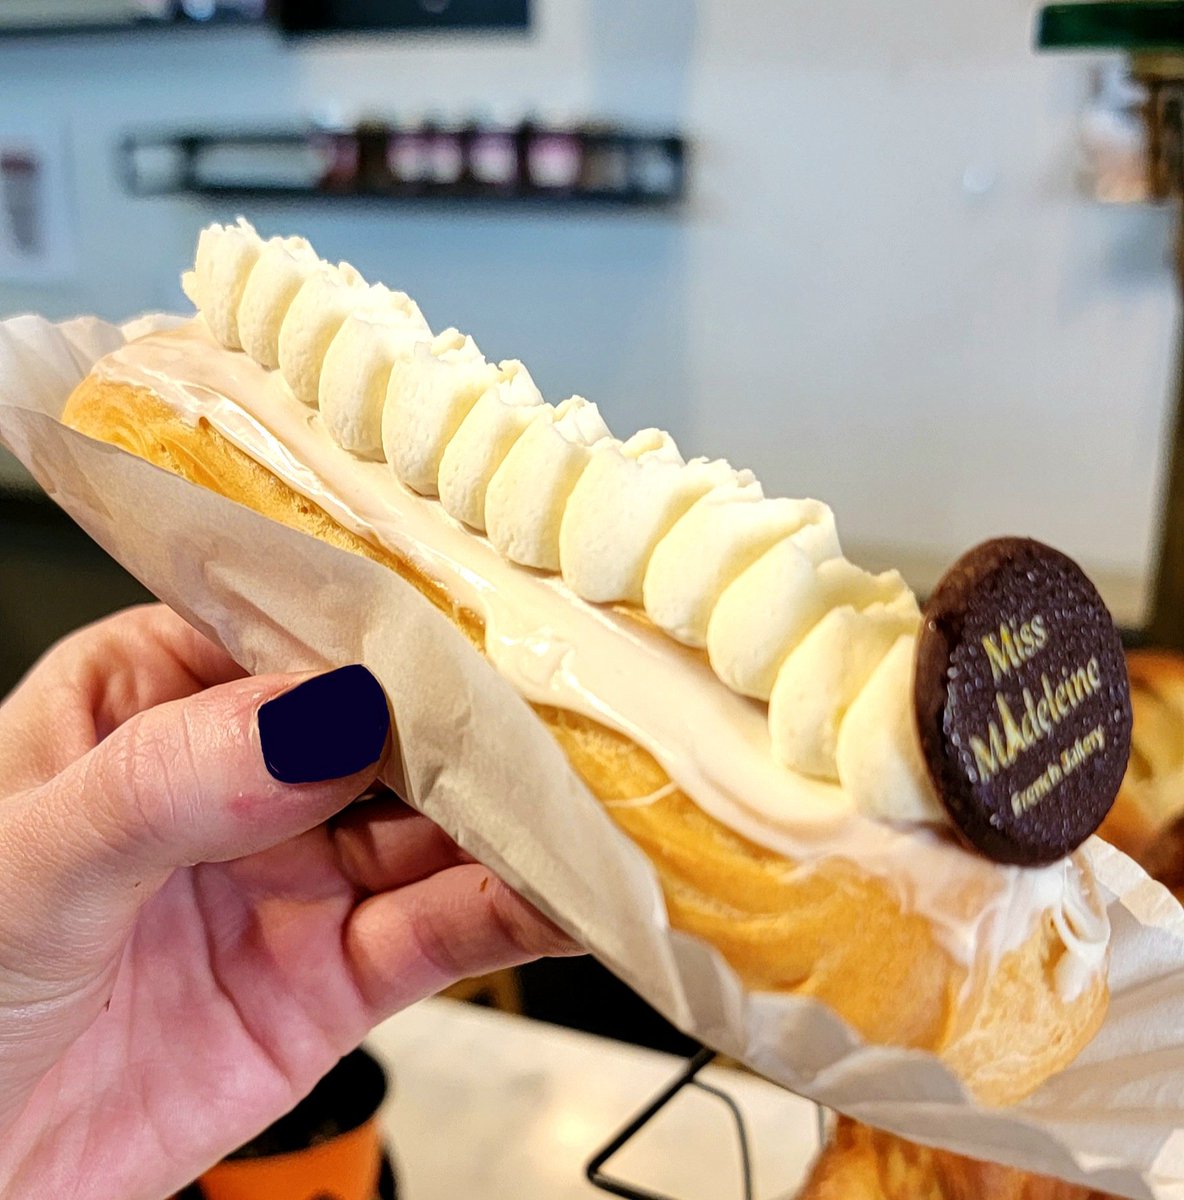 Our vanilla eclair is all about the twist and turns in your month!

#eclair #vanilla #pateachoux #vanillapastrycream #sweet #dessertporn #frenchbakery #desserts #nycsweets